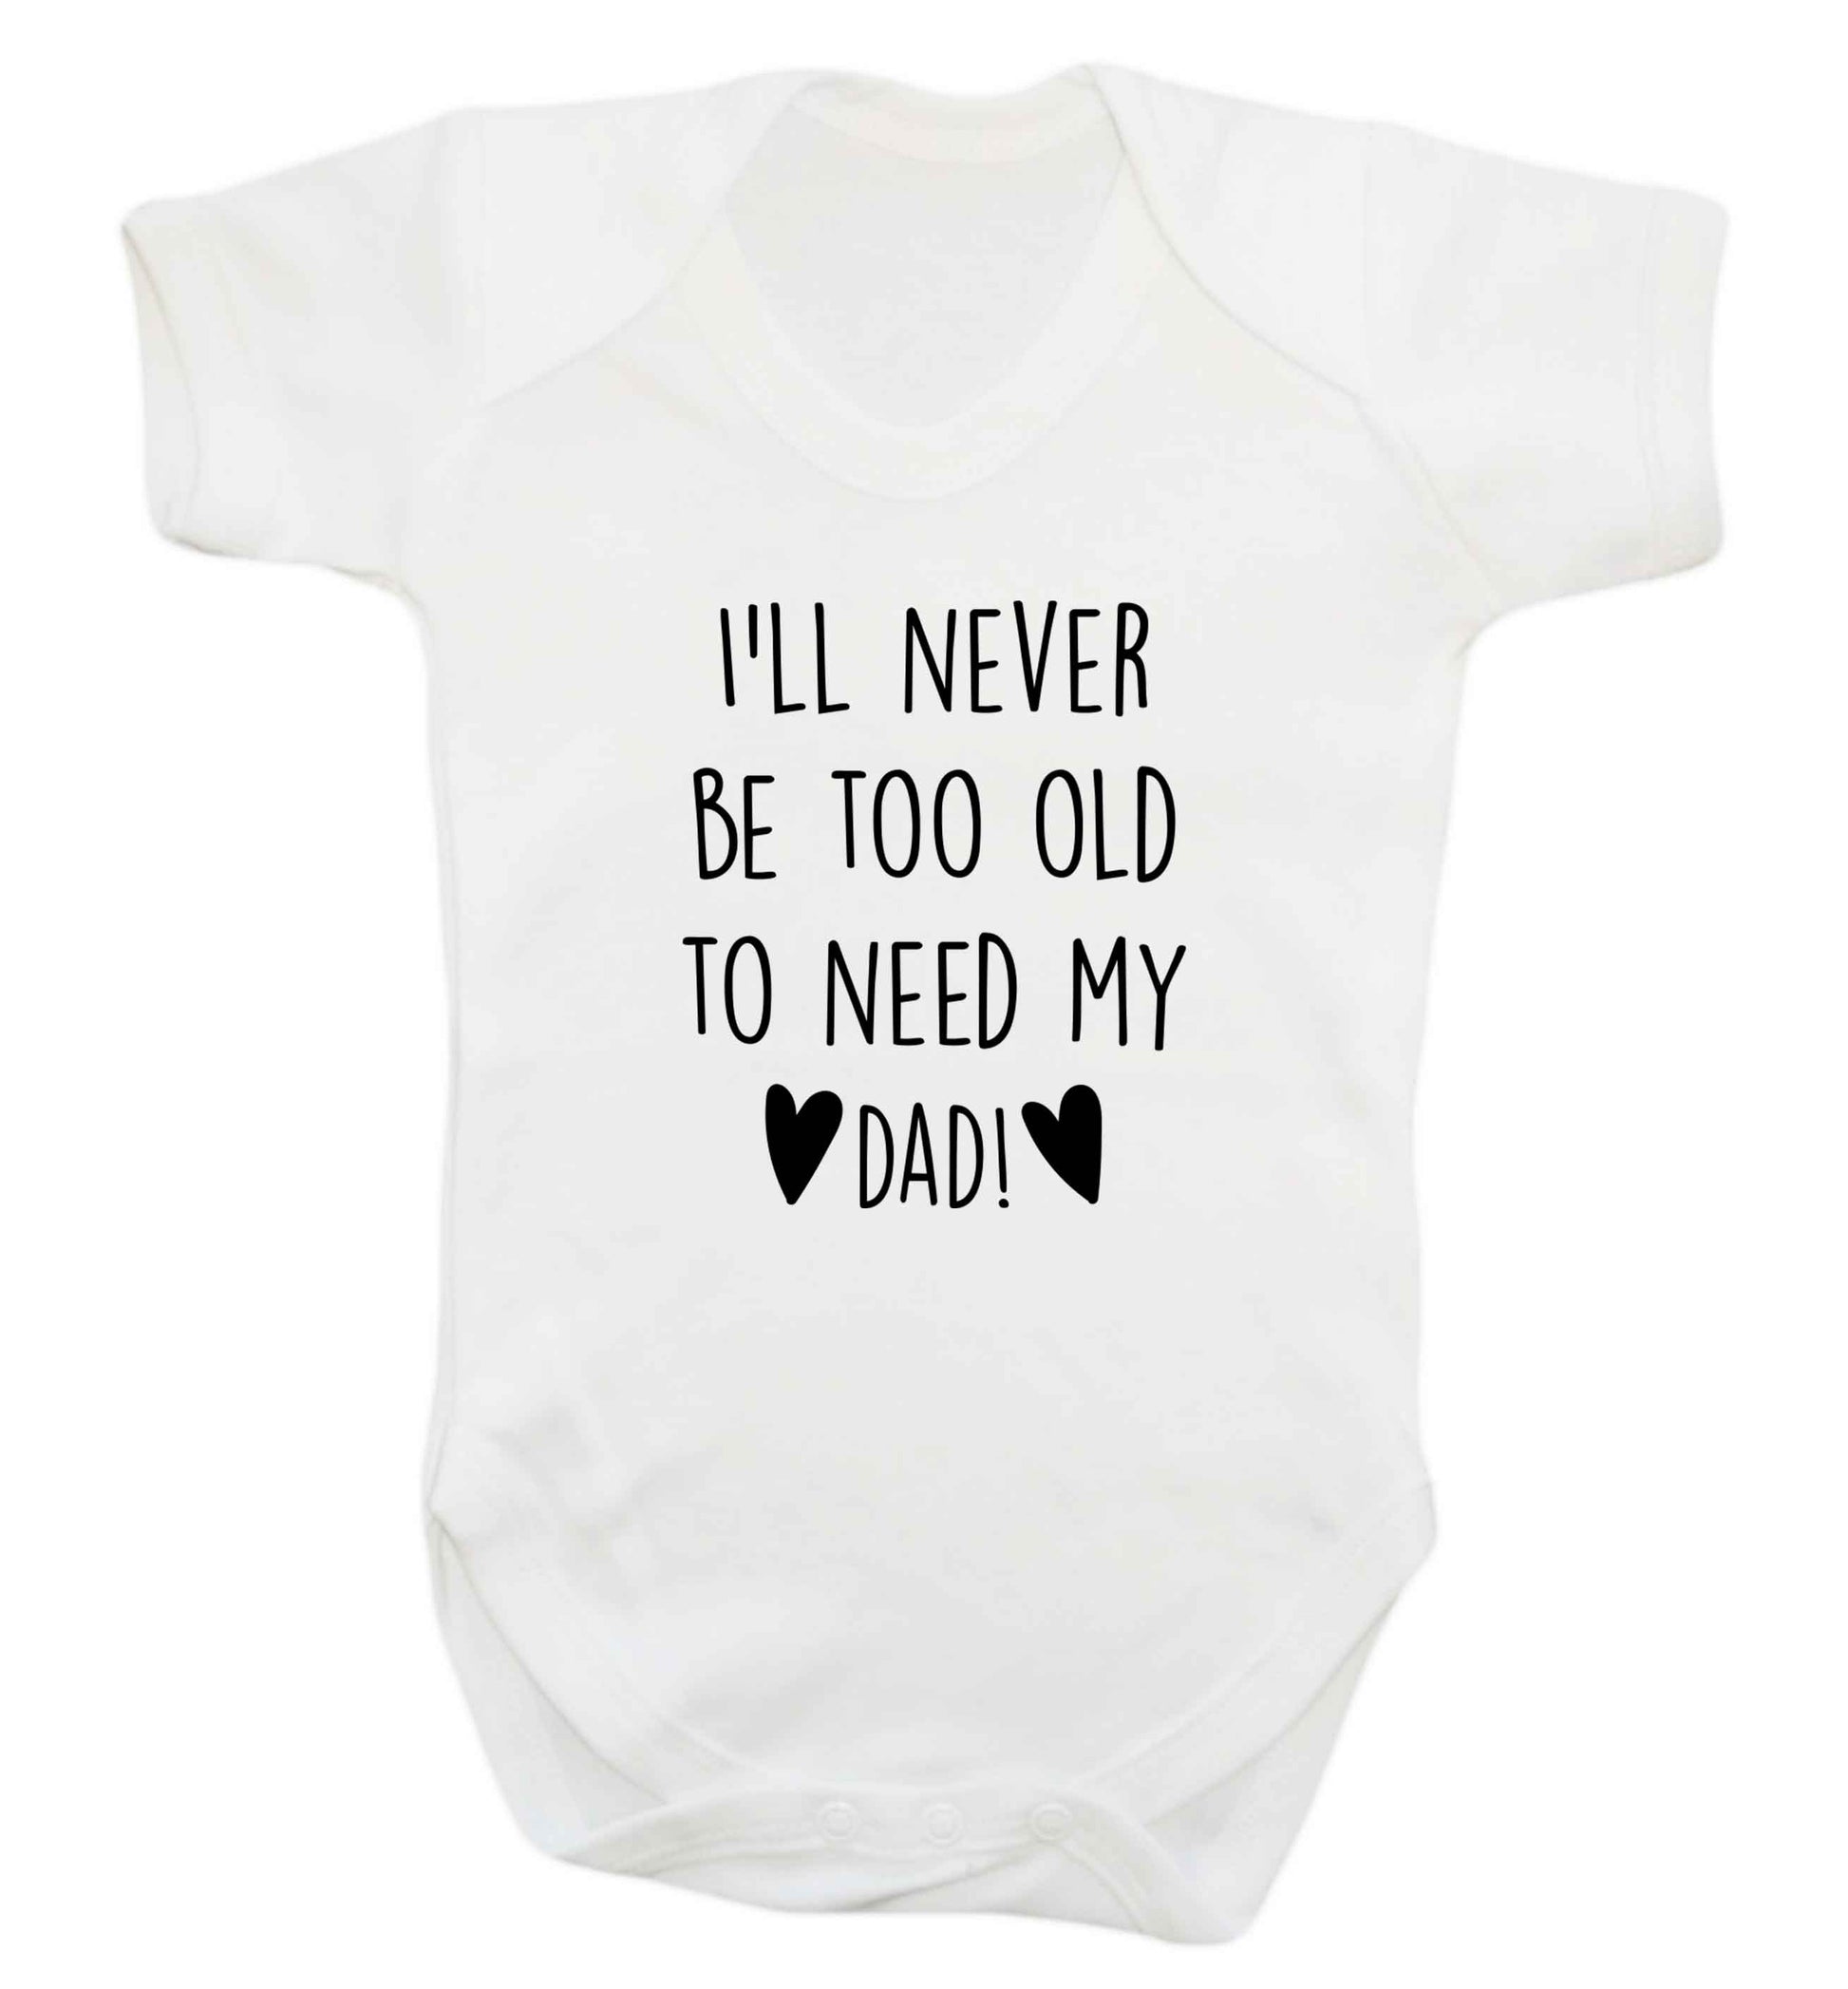 I'll never be too old to need my dad baby vest white 18-24 months